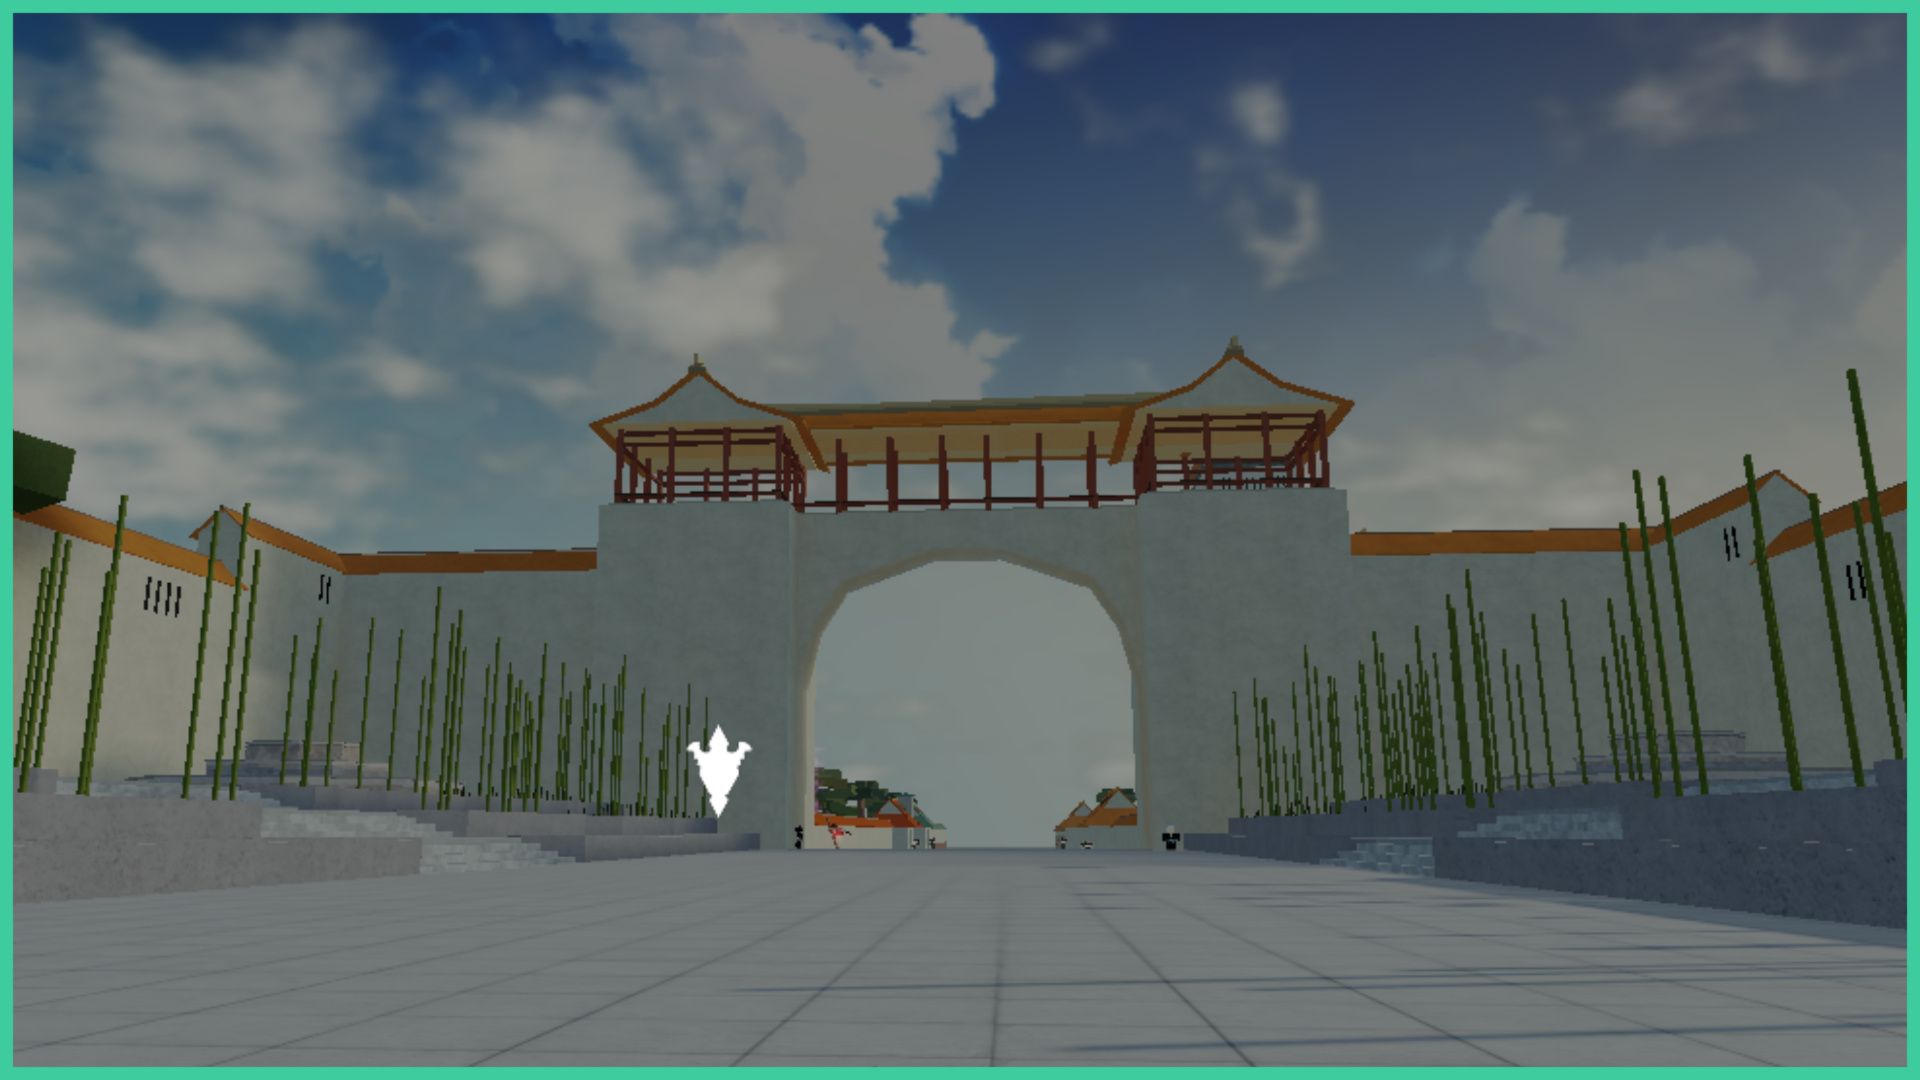 feature image for our type soul clans guide, it's a screenshot of soul society, and the archway entrance with 2 balconies at the top covered by a roof, there are shoots of bamboo on either side of the walkway, with steps leading up to a higher platform on both sides, the sky is full of clouds